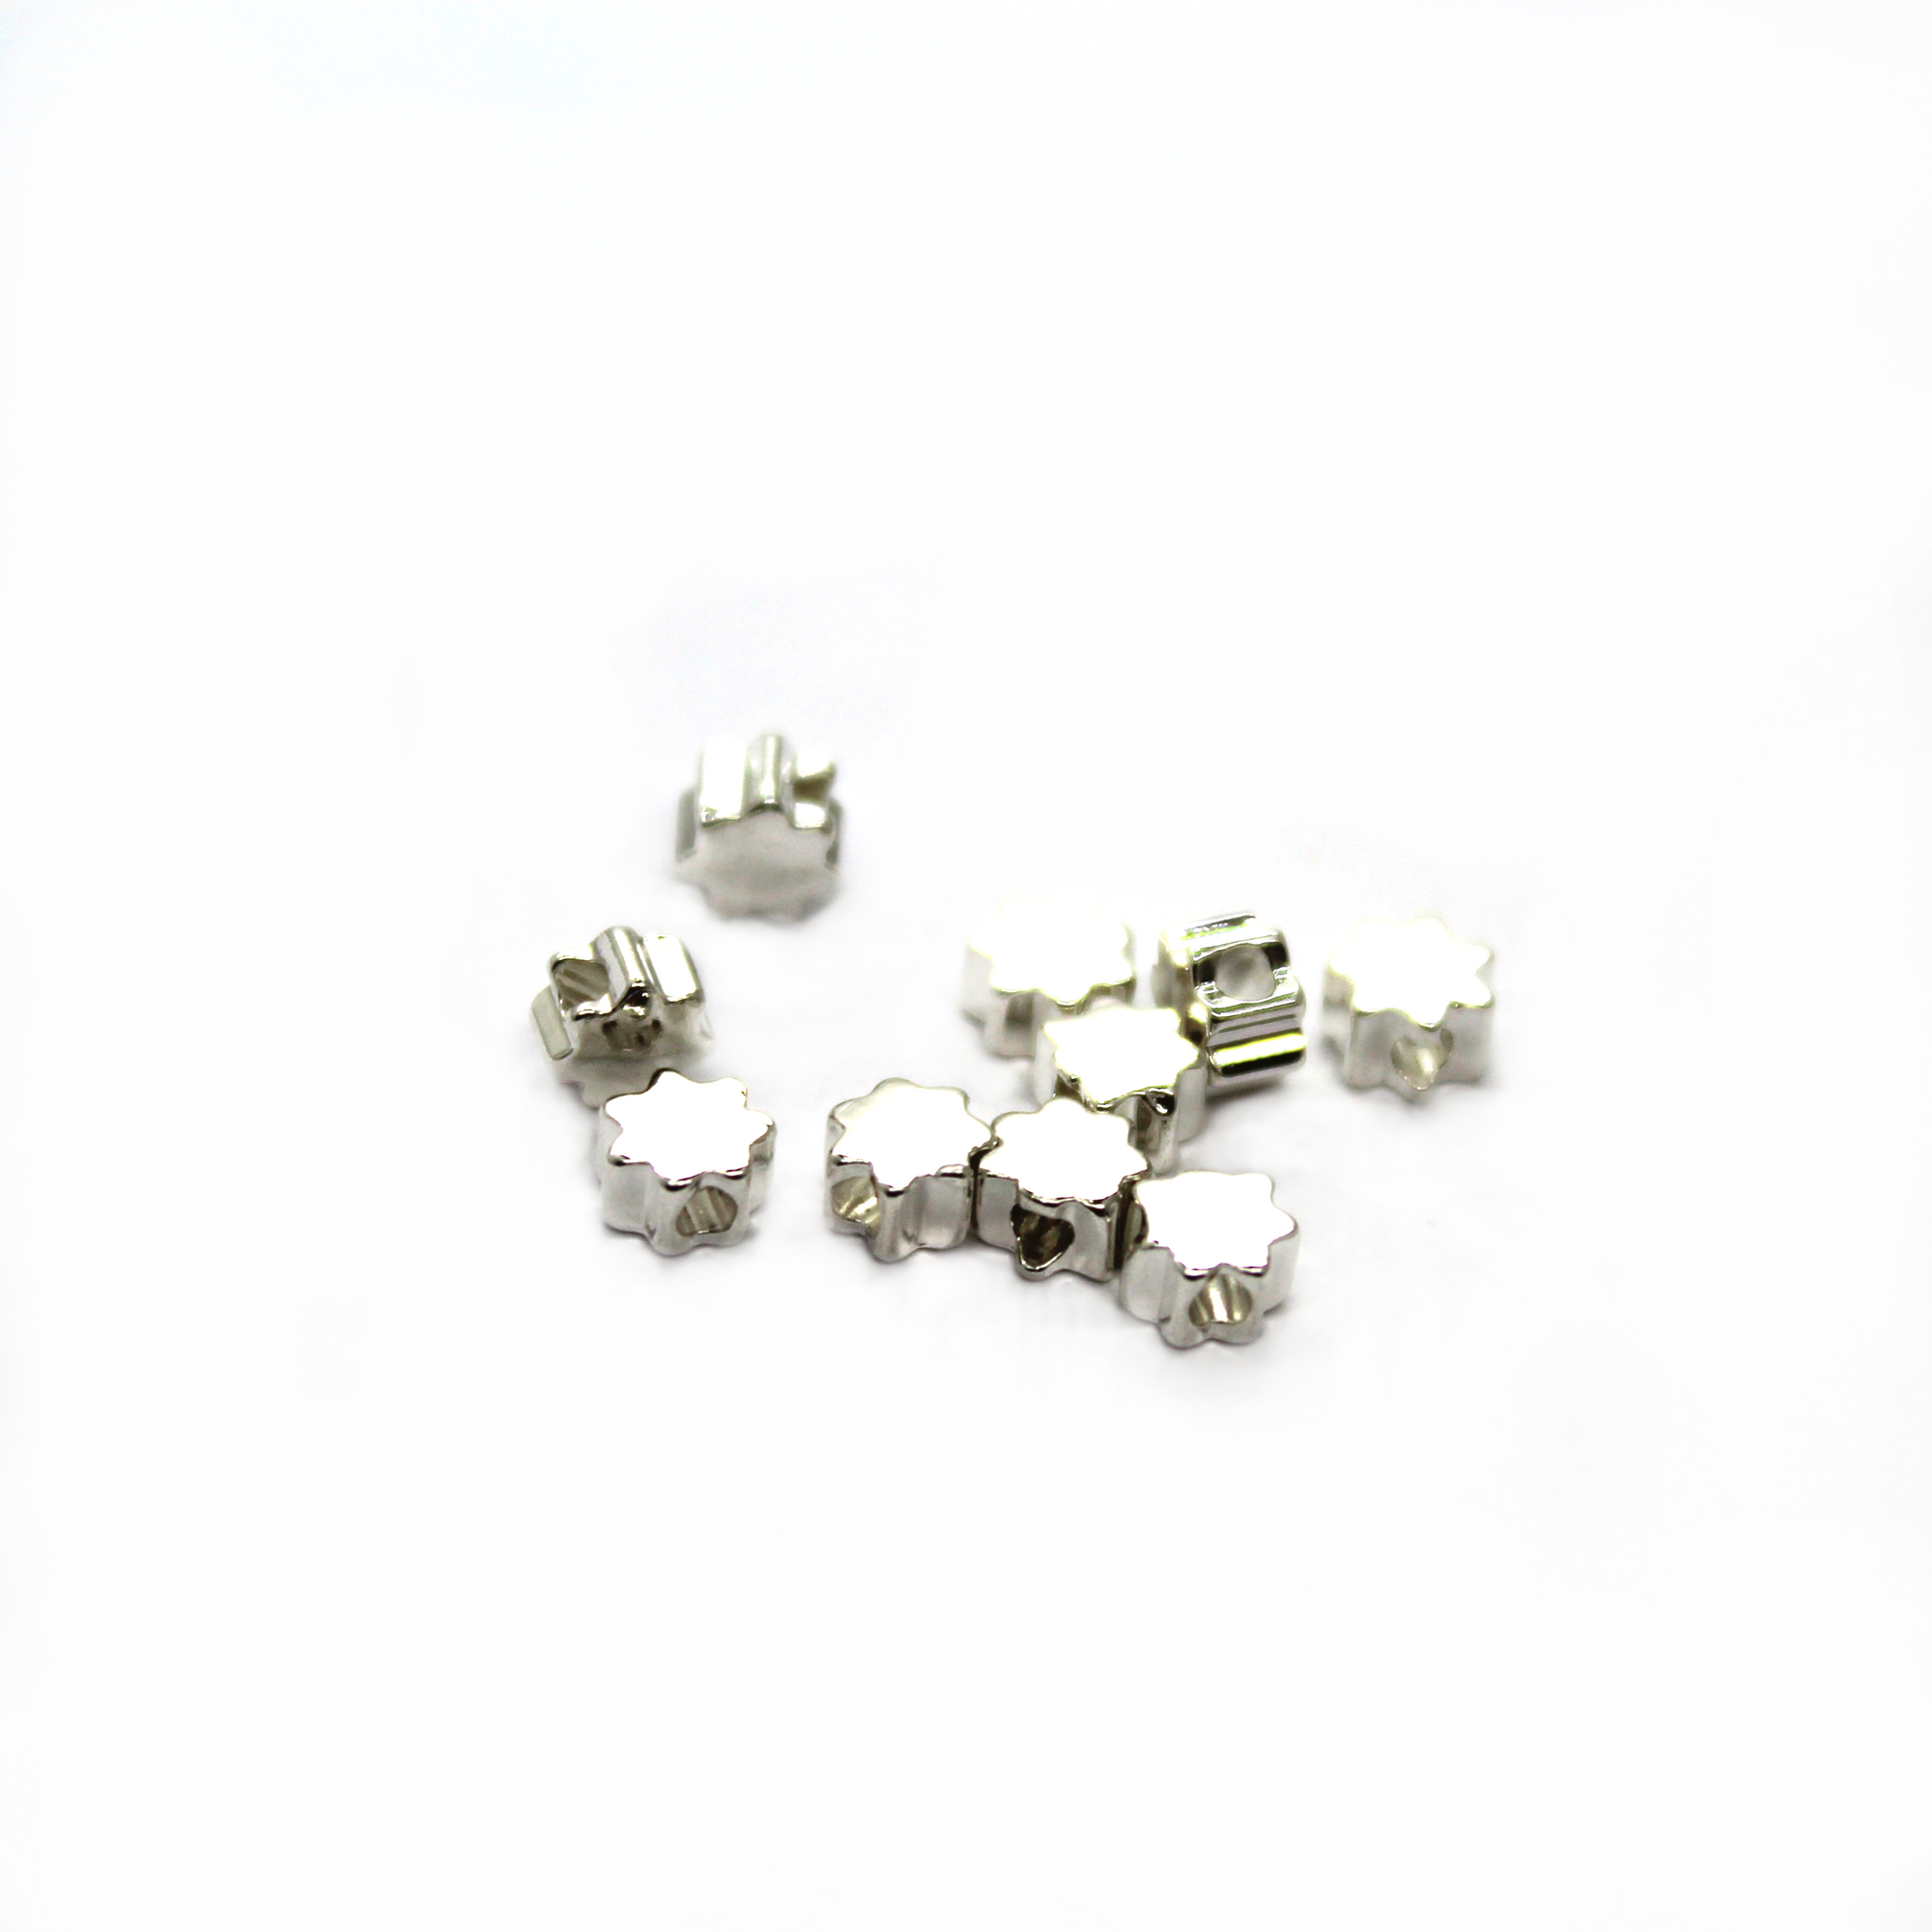 Spacer, Small Star, Bright Silver, Alloy, 4mm X 4mm, Sold Per pkg of 20